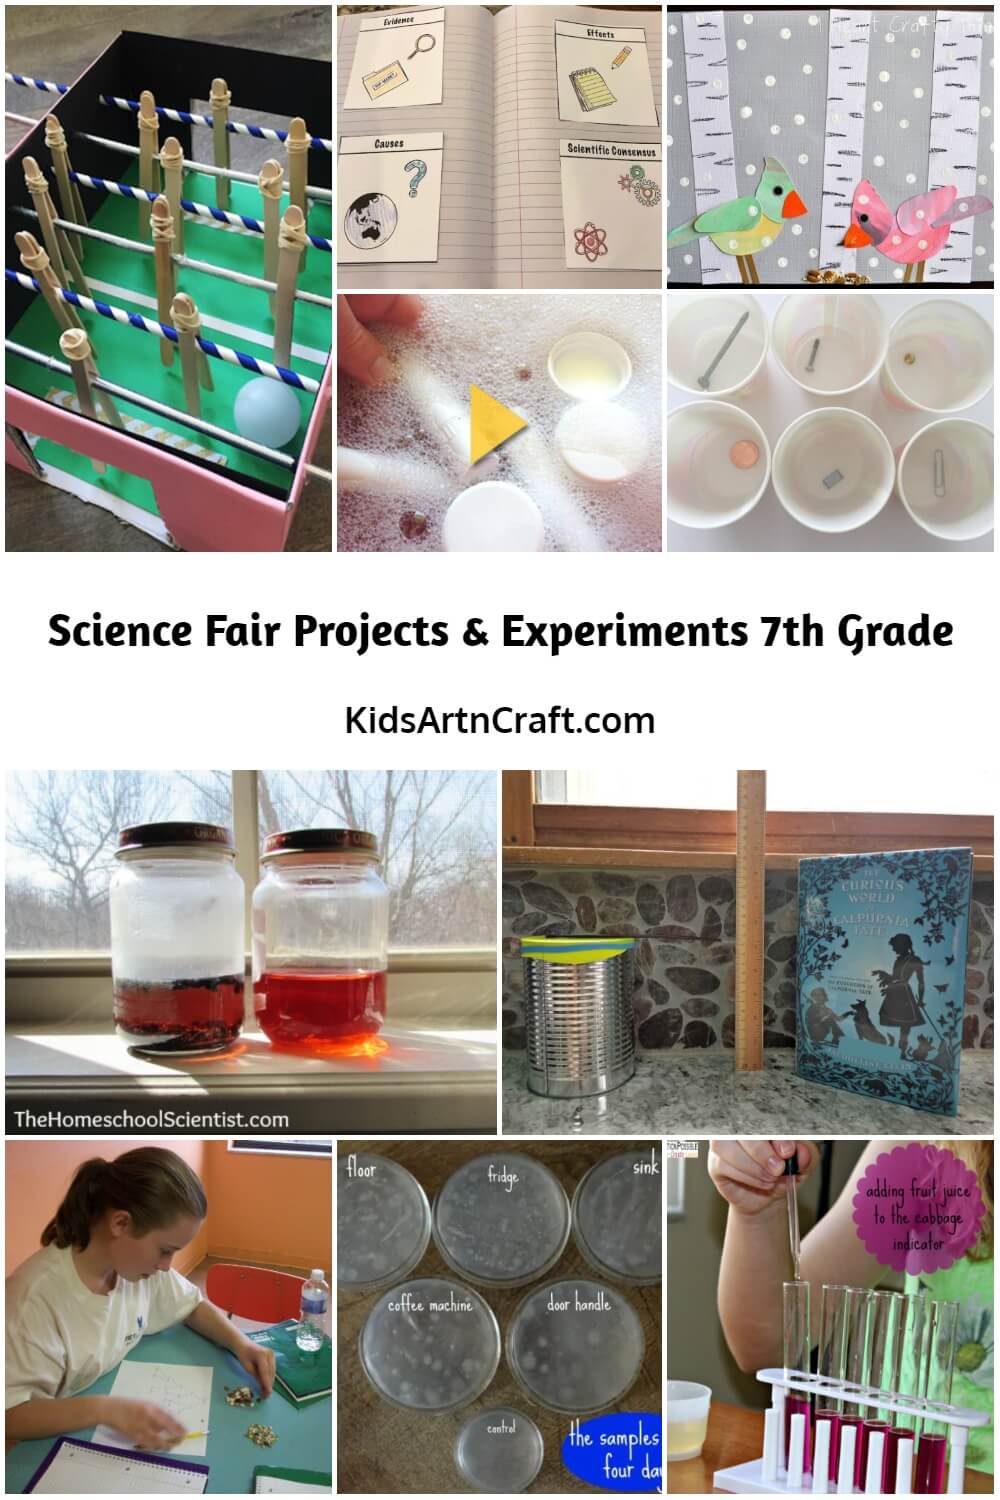 Science Fair Projects & Experiments 7th Grade